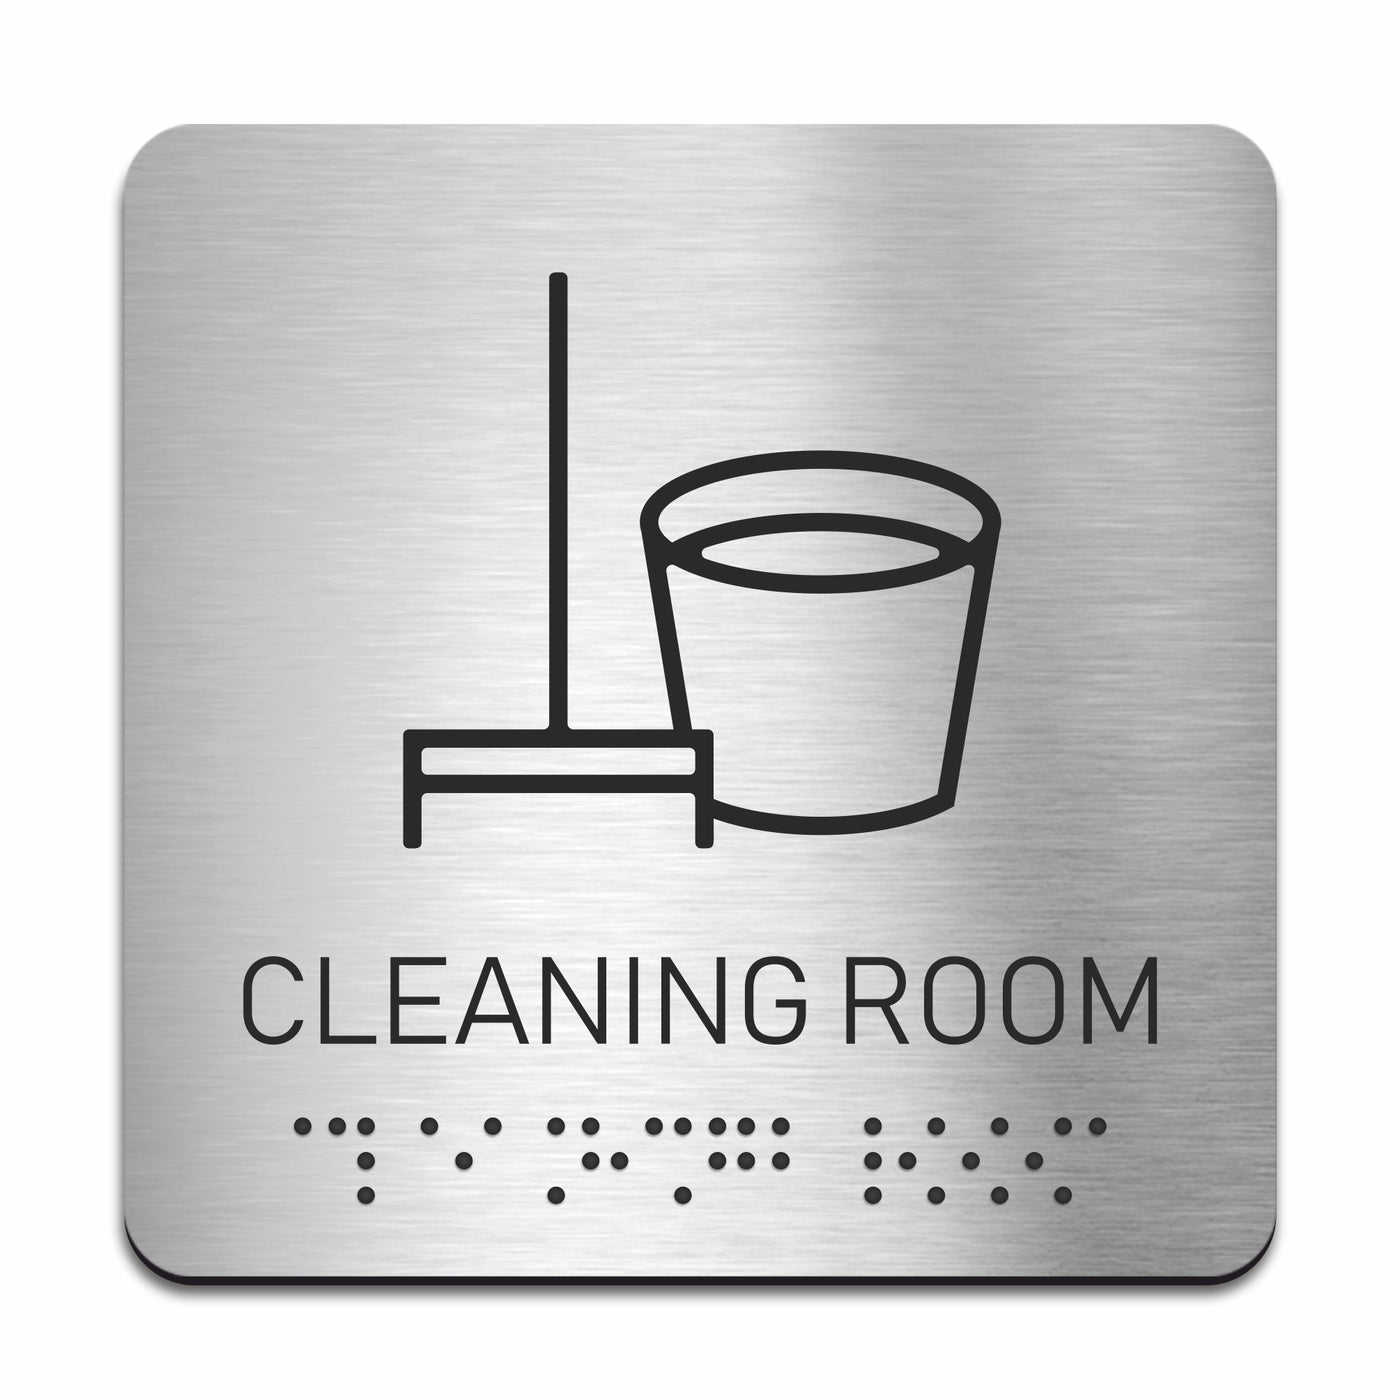 Stainless Steel Cleaning Room Sign with Braille